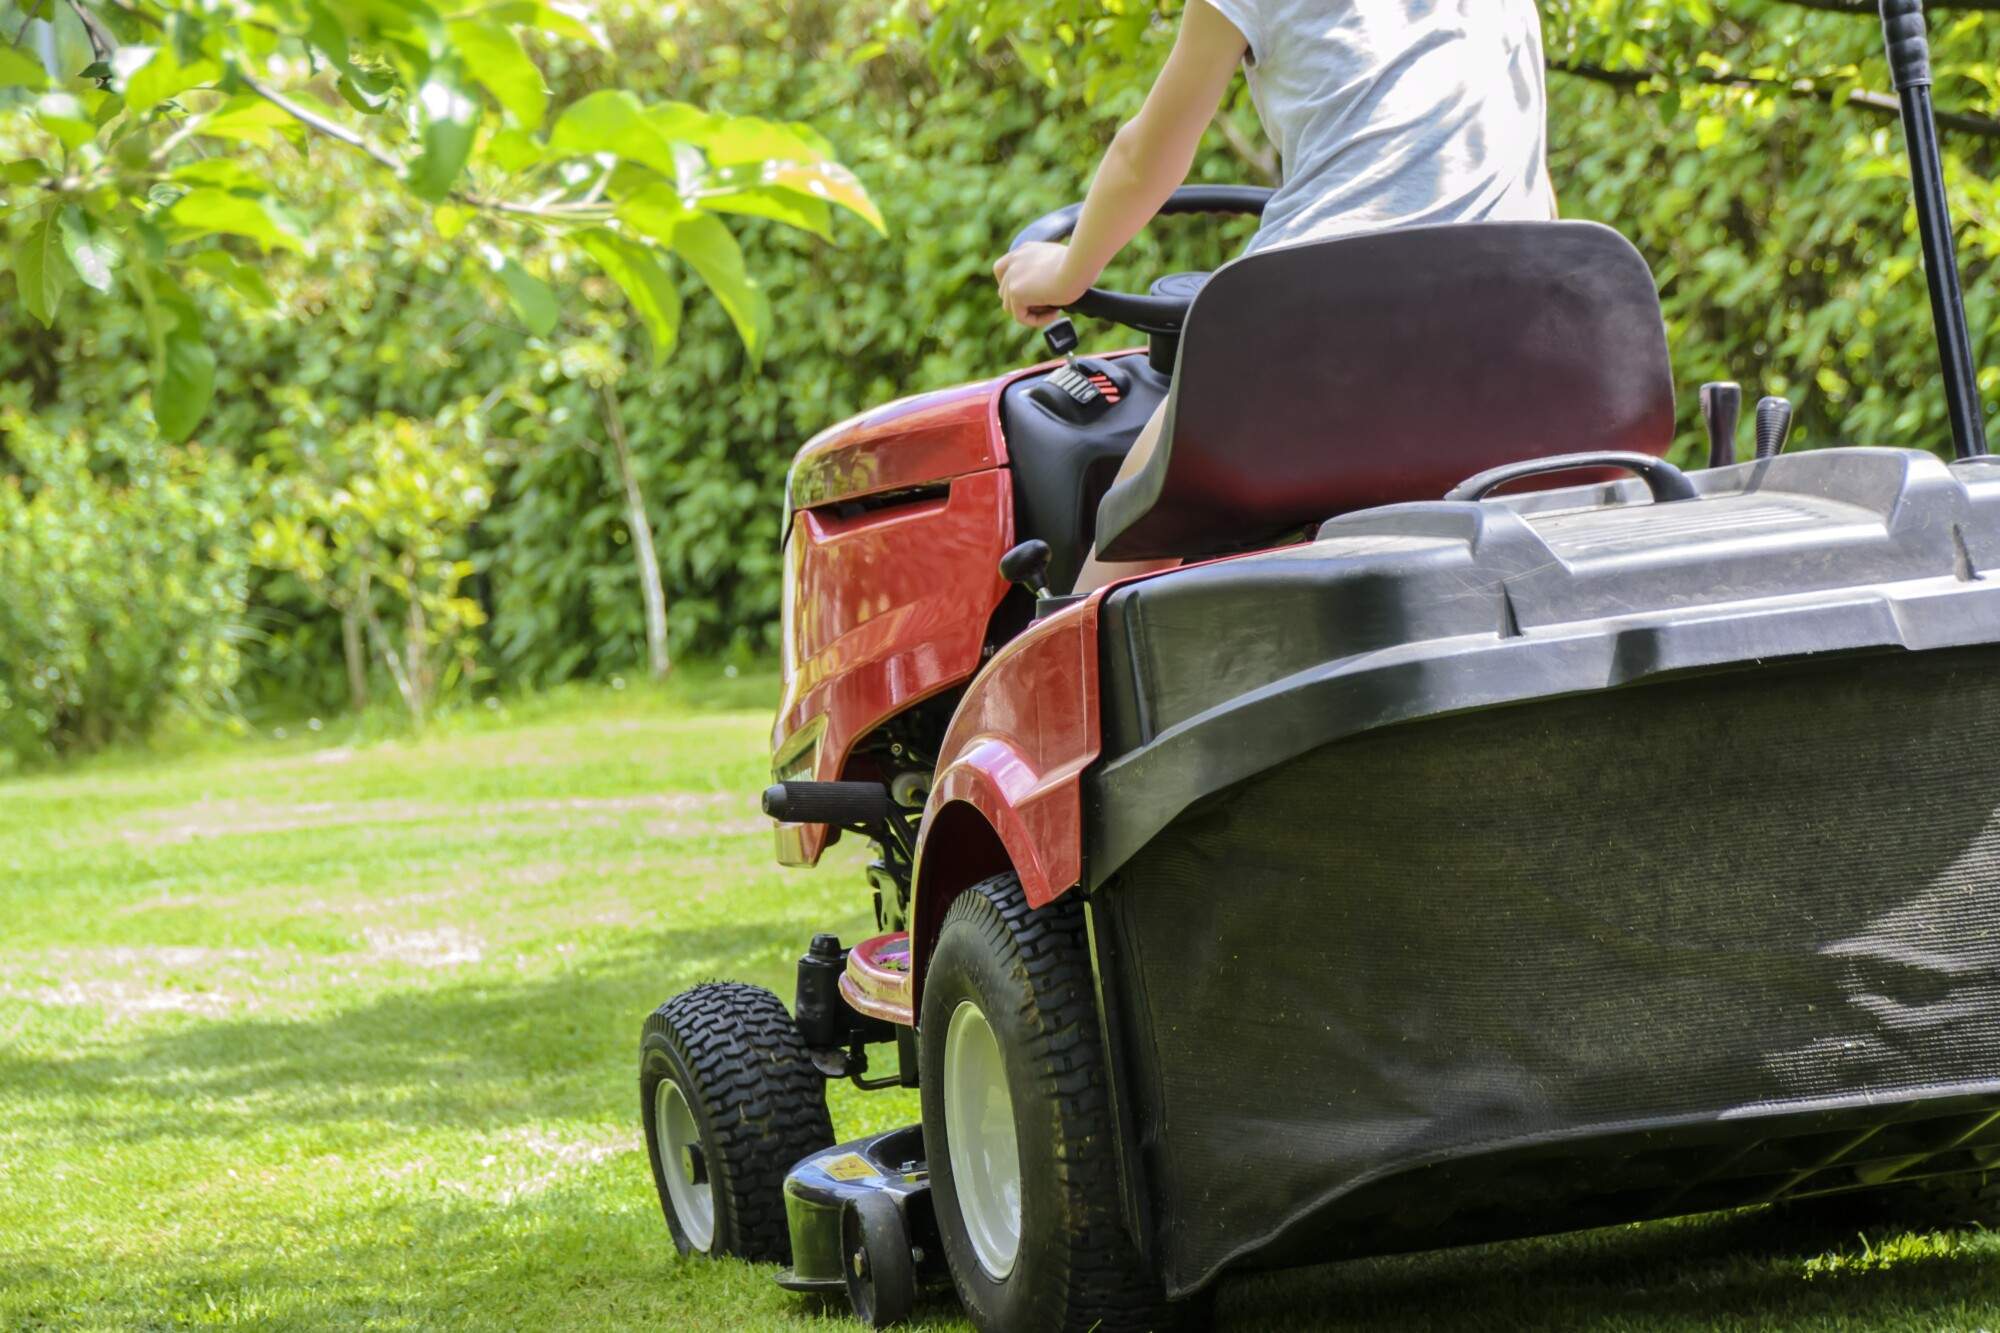 Mowing Grass: How Often Should You Do It?